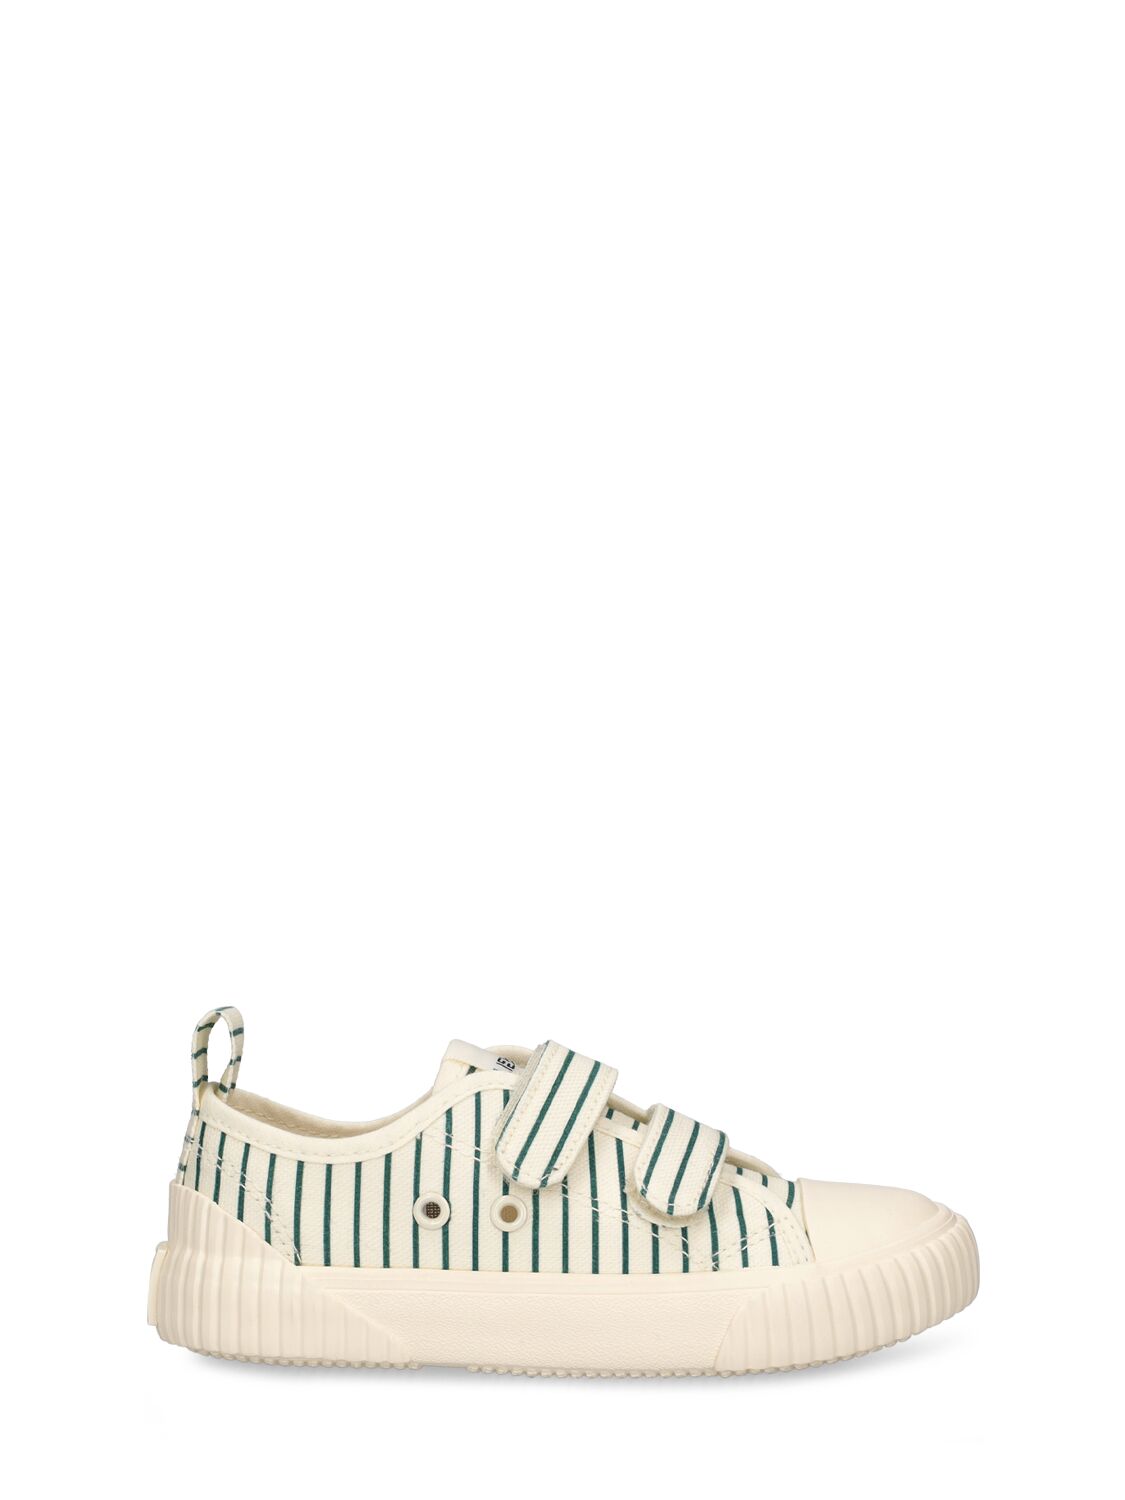 Liewood Kids' Handmade Cotton Canvas Strap Trainers In Green,white